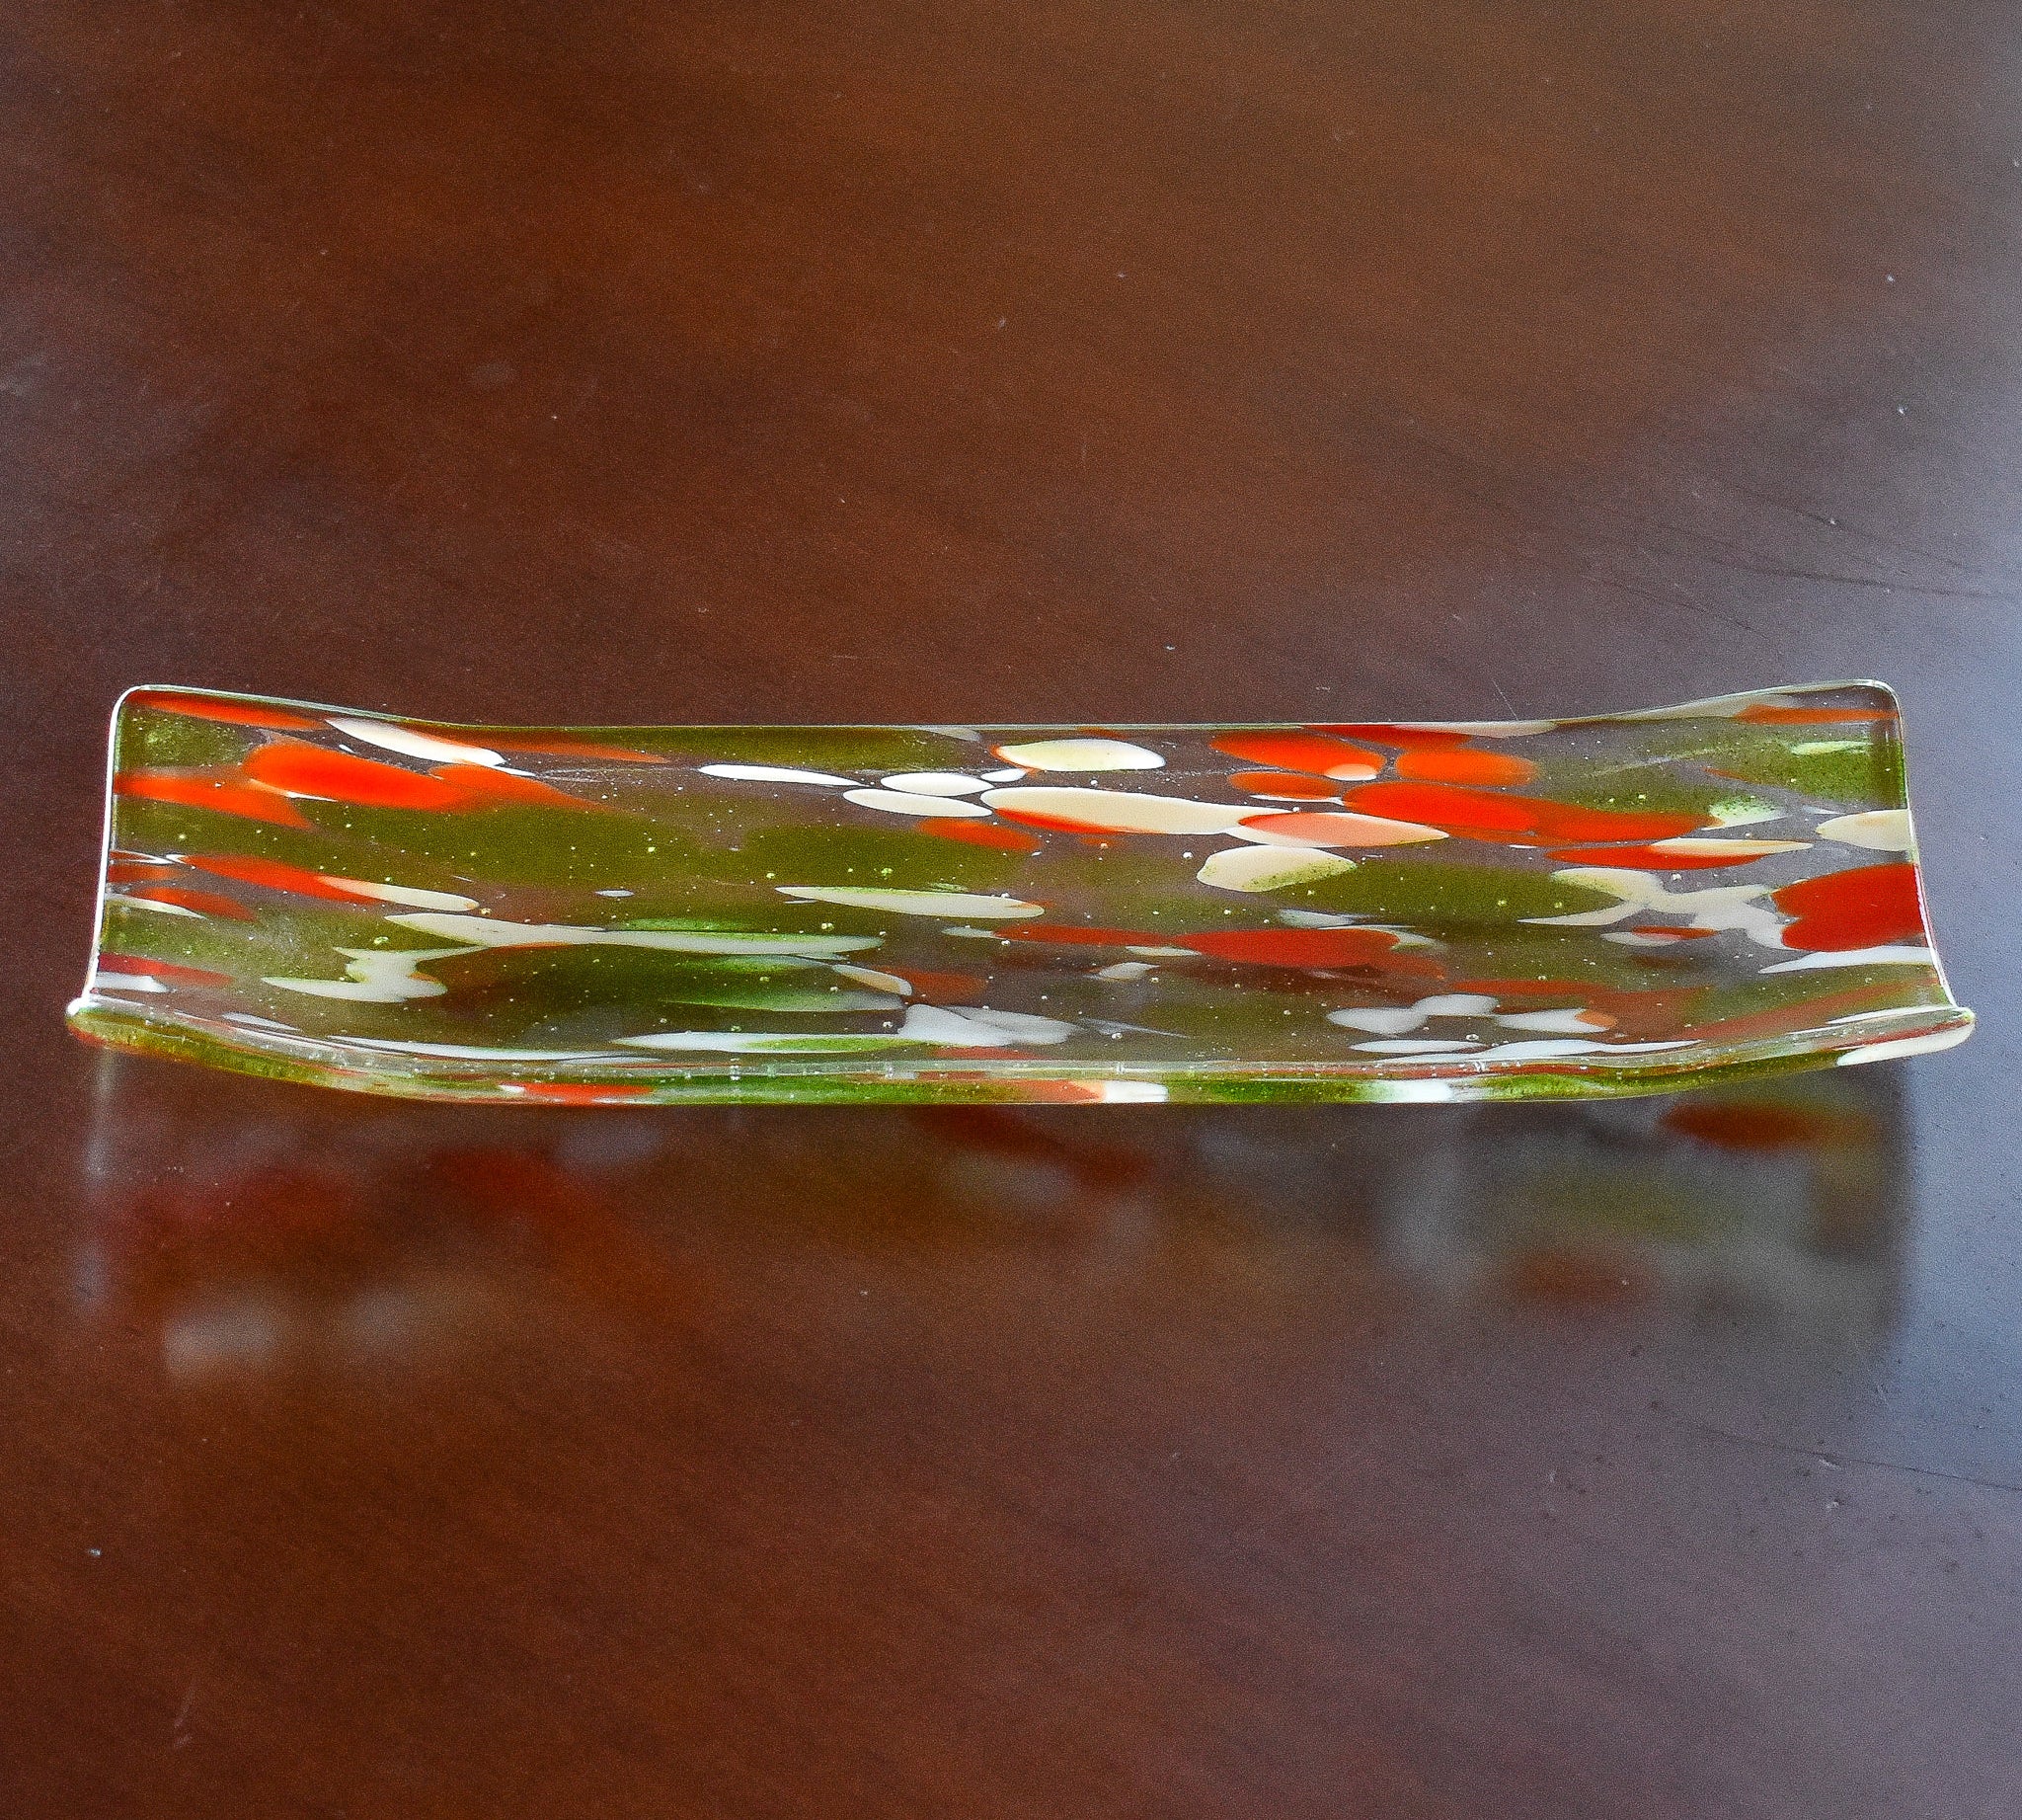 clear glass channel-shaped tray with orange, lime green and white design, resting on wood table.